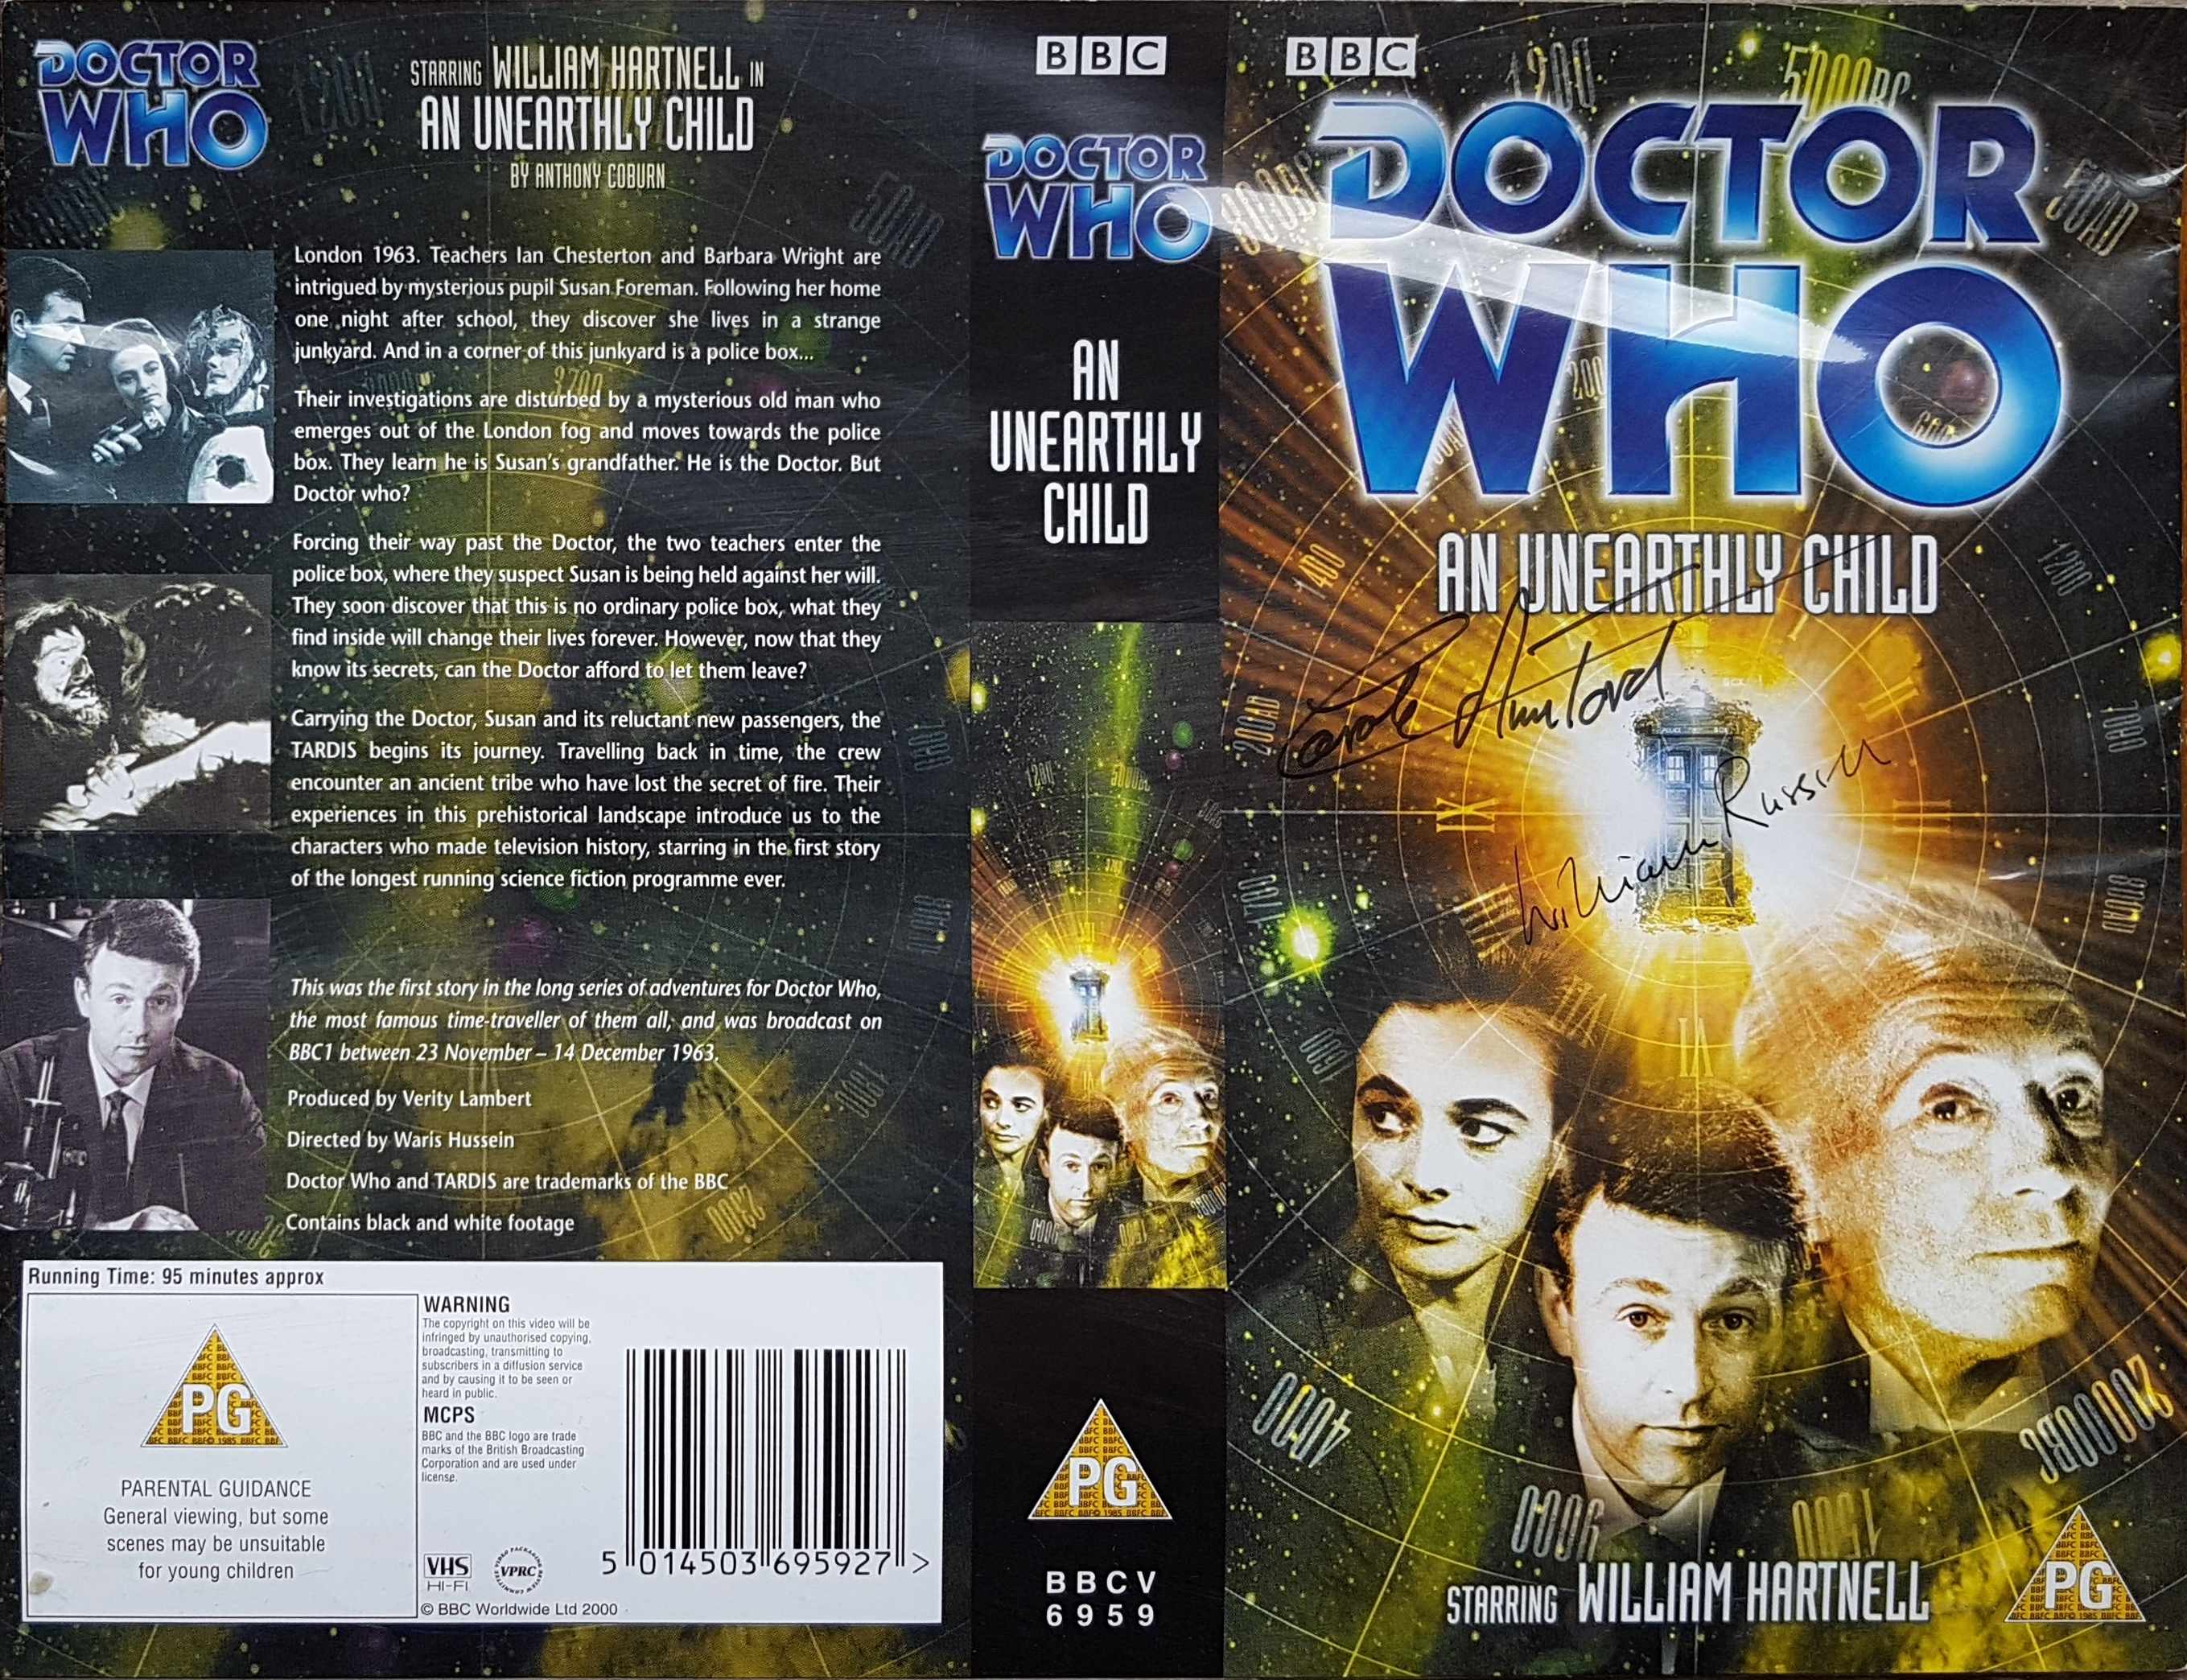 Picture of BBCV 6959 Doctor Who - An unearthly child by artist Anthony Coburn from the BBC videos - Records and Tapes library